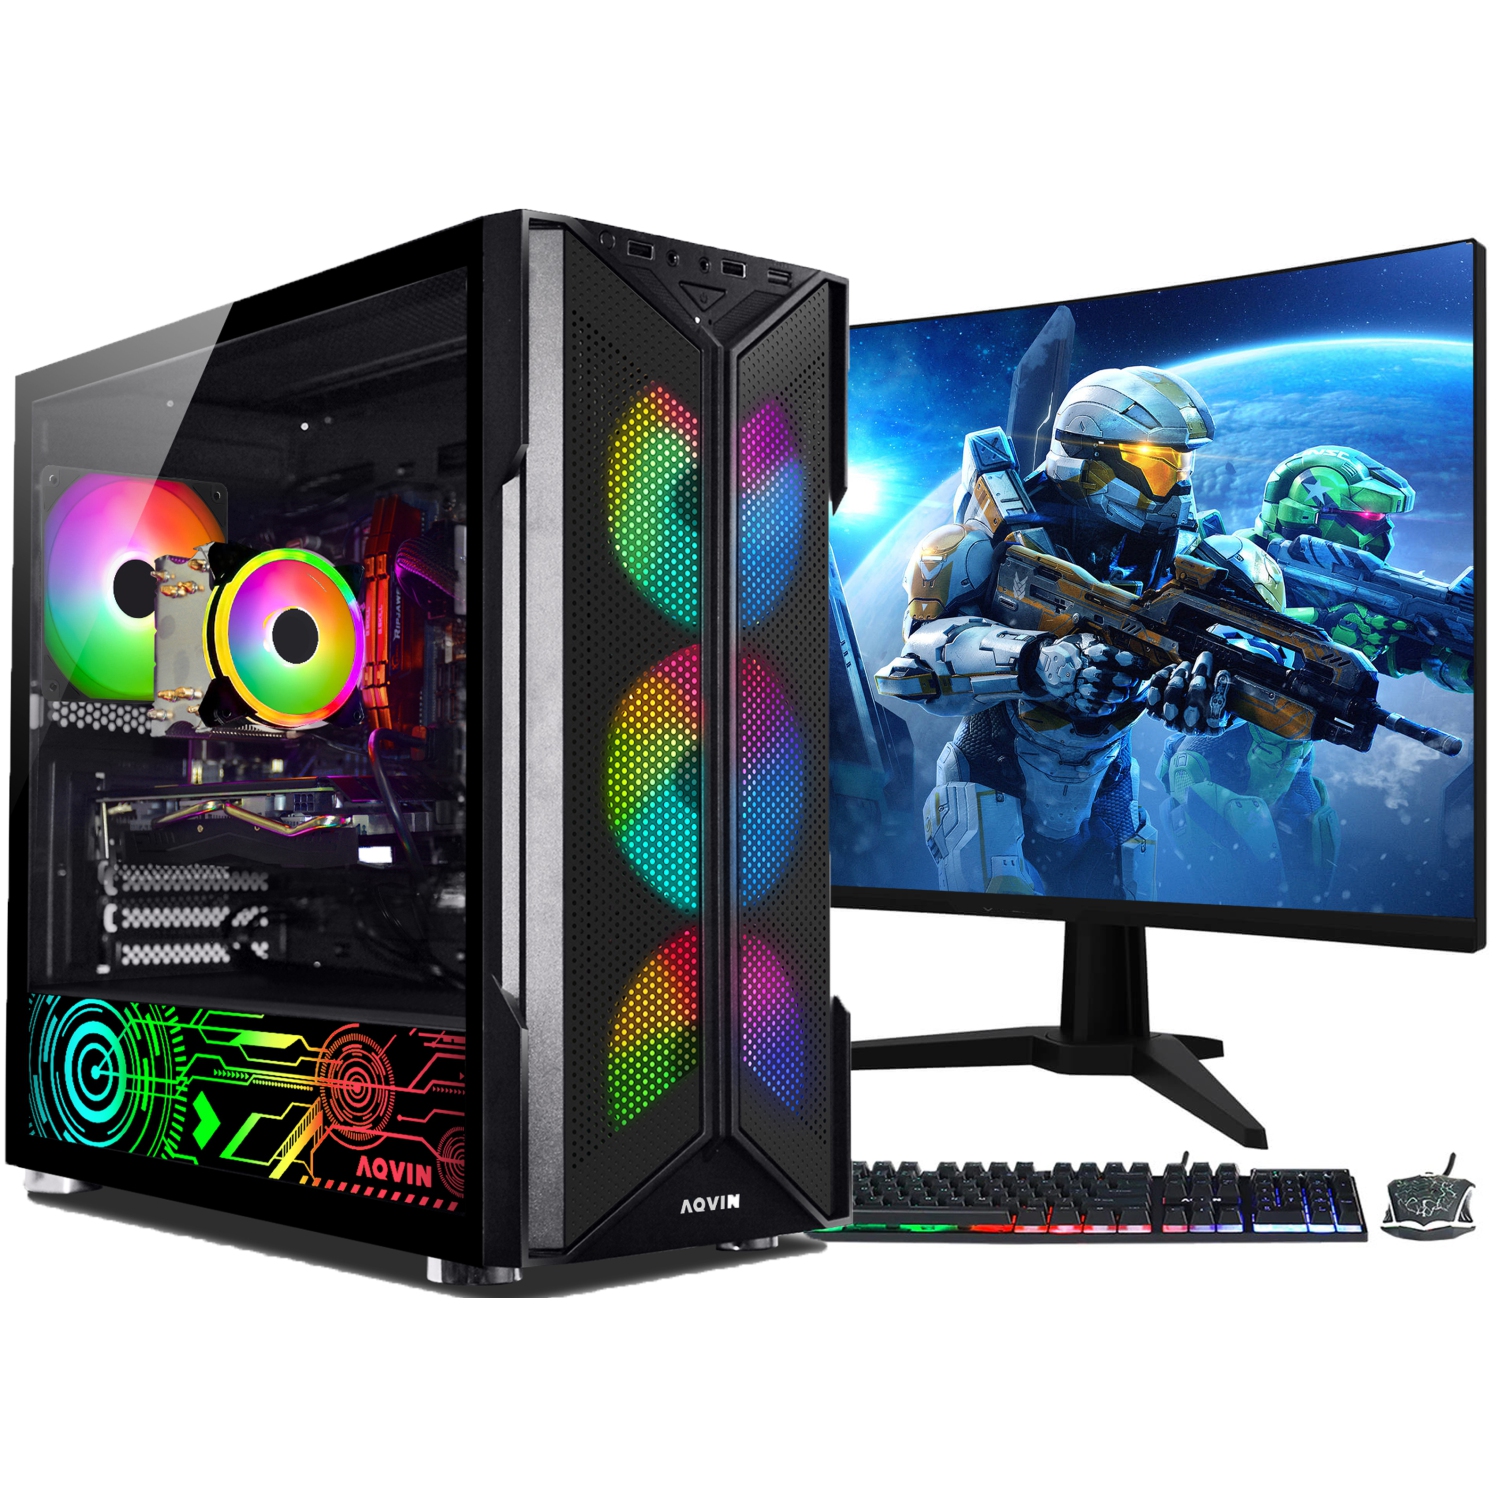 Gaming PC AQVIN-AQ20 Desktop Computer Tower - New 24 inch Curved Gaming Monitor (Intel Core i7 processor/ 32GB DDR4 RAM/ 2TB SSD/ GeForce RTX 4060 8GB/ windows 11)- Only at BestBuy